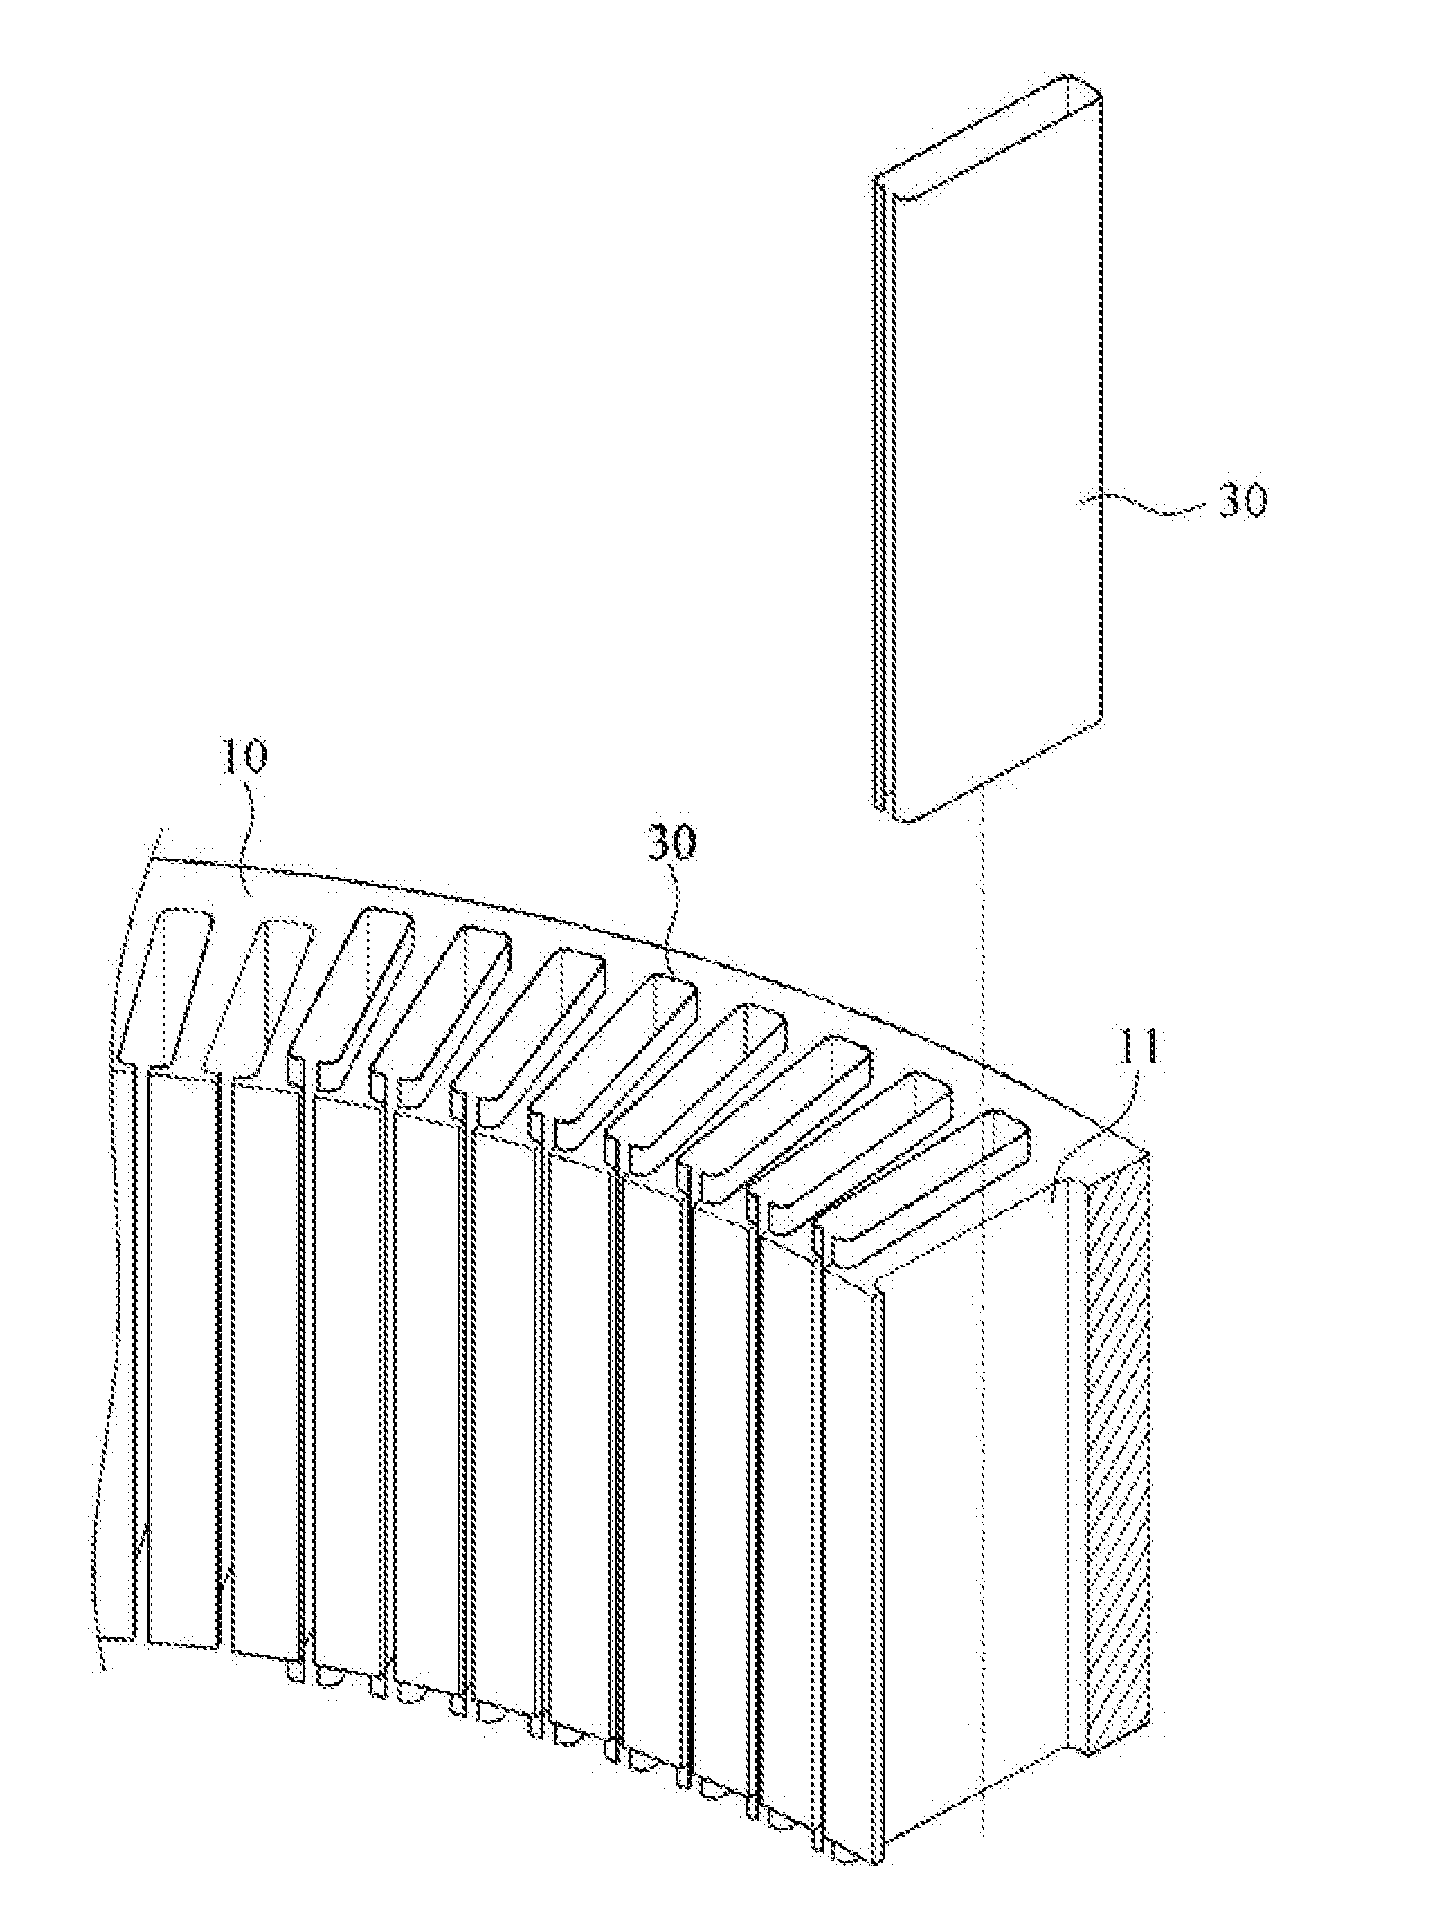 Method for Making Wound Stator of Automotive Generator